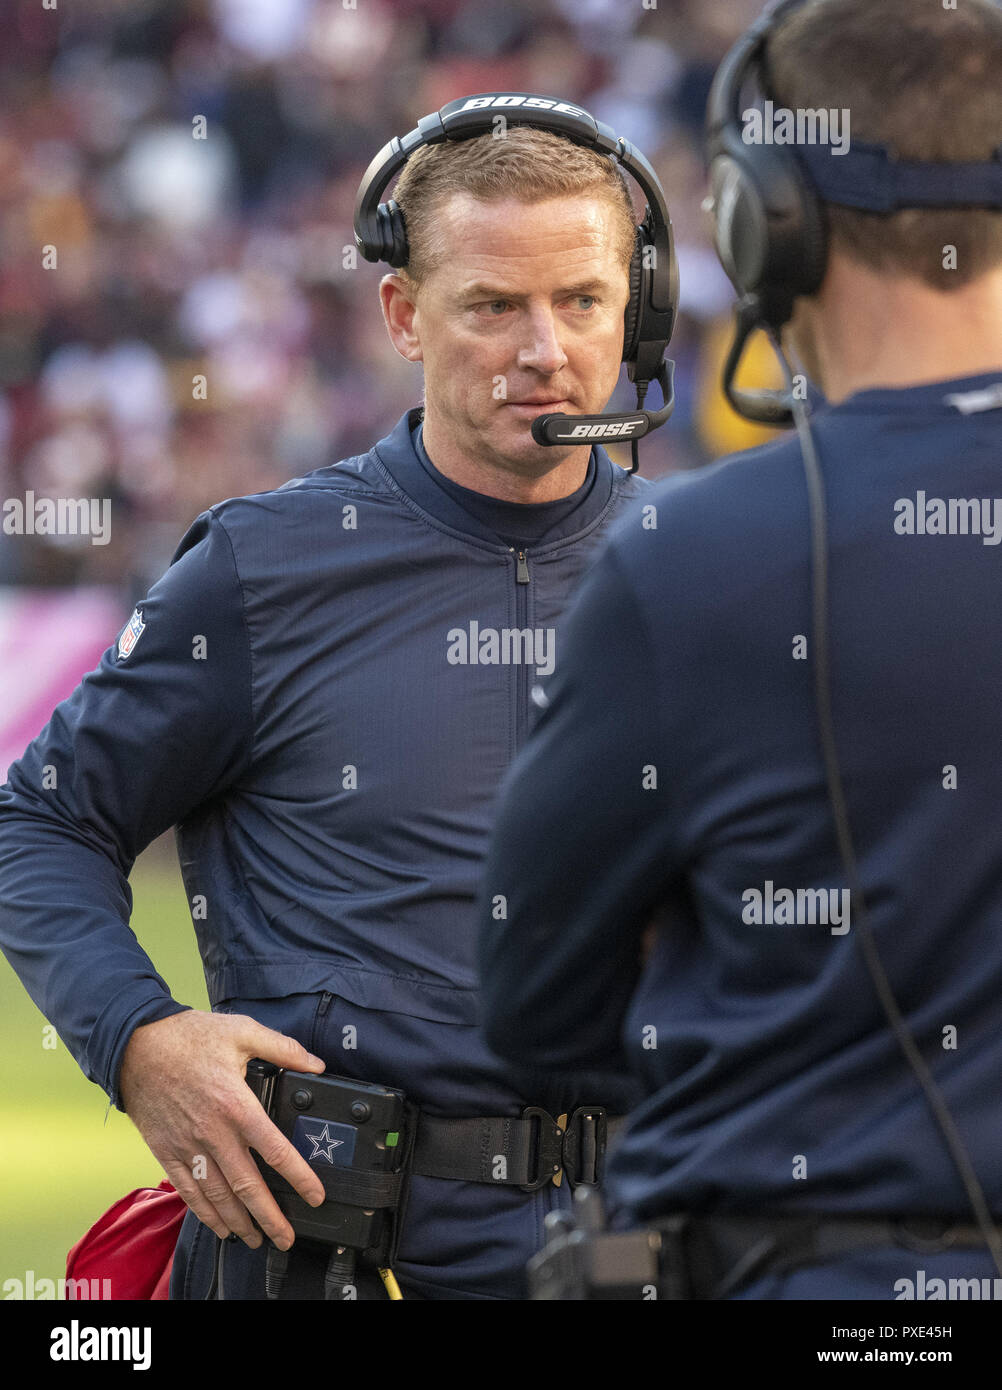 Landover, Maryland, USA. 21st Oct, 2018. Dallas Cowboys head coach Jason Garrett speaks with an assistant coach during a break in the second quarter action against the Washington Redskins at FedEx Field in Landover, Maryland on Sunday, October 21, 2018 Credit: Ron Sachs/CNP/ZUMA Wire/Alamy Live News Stock Photo